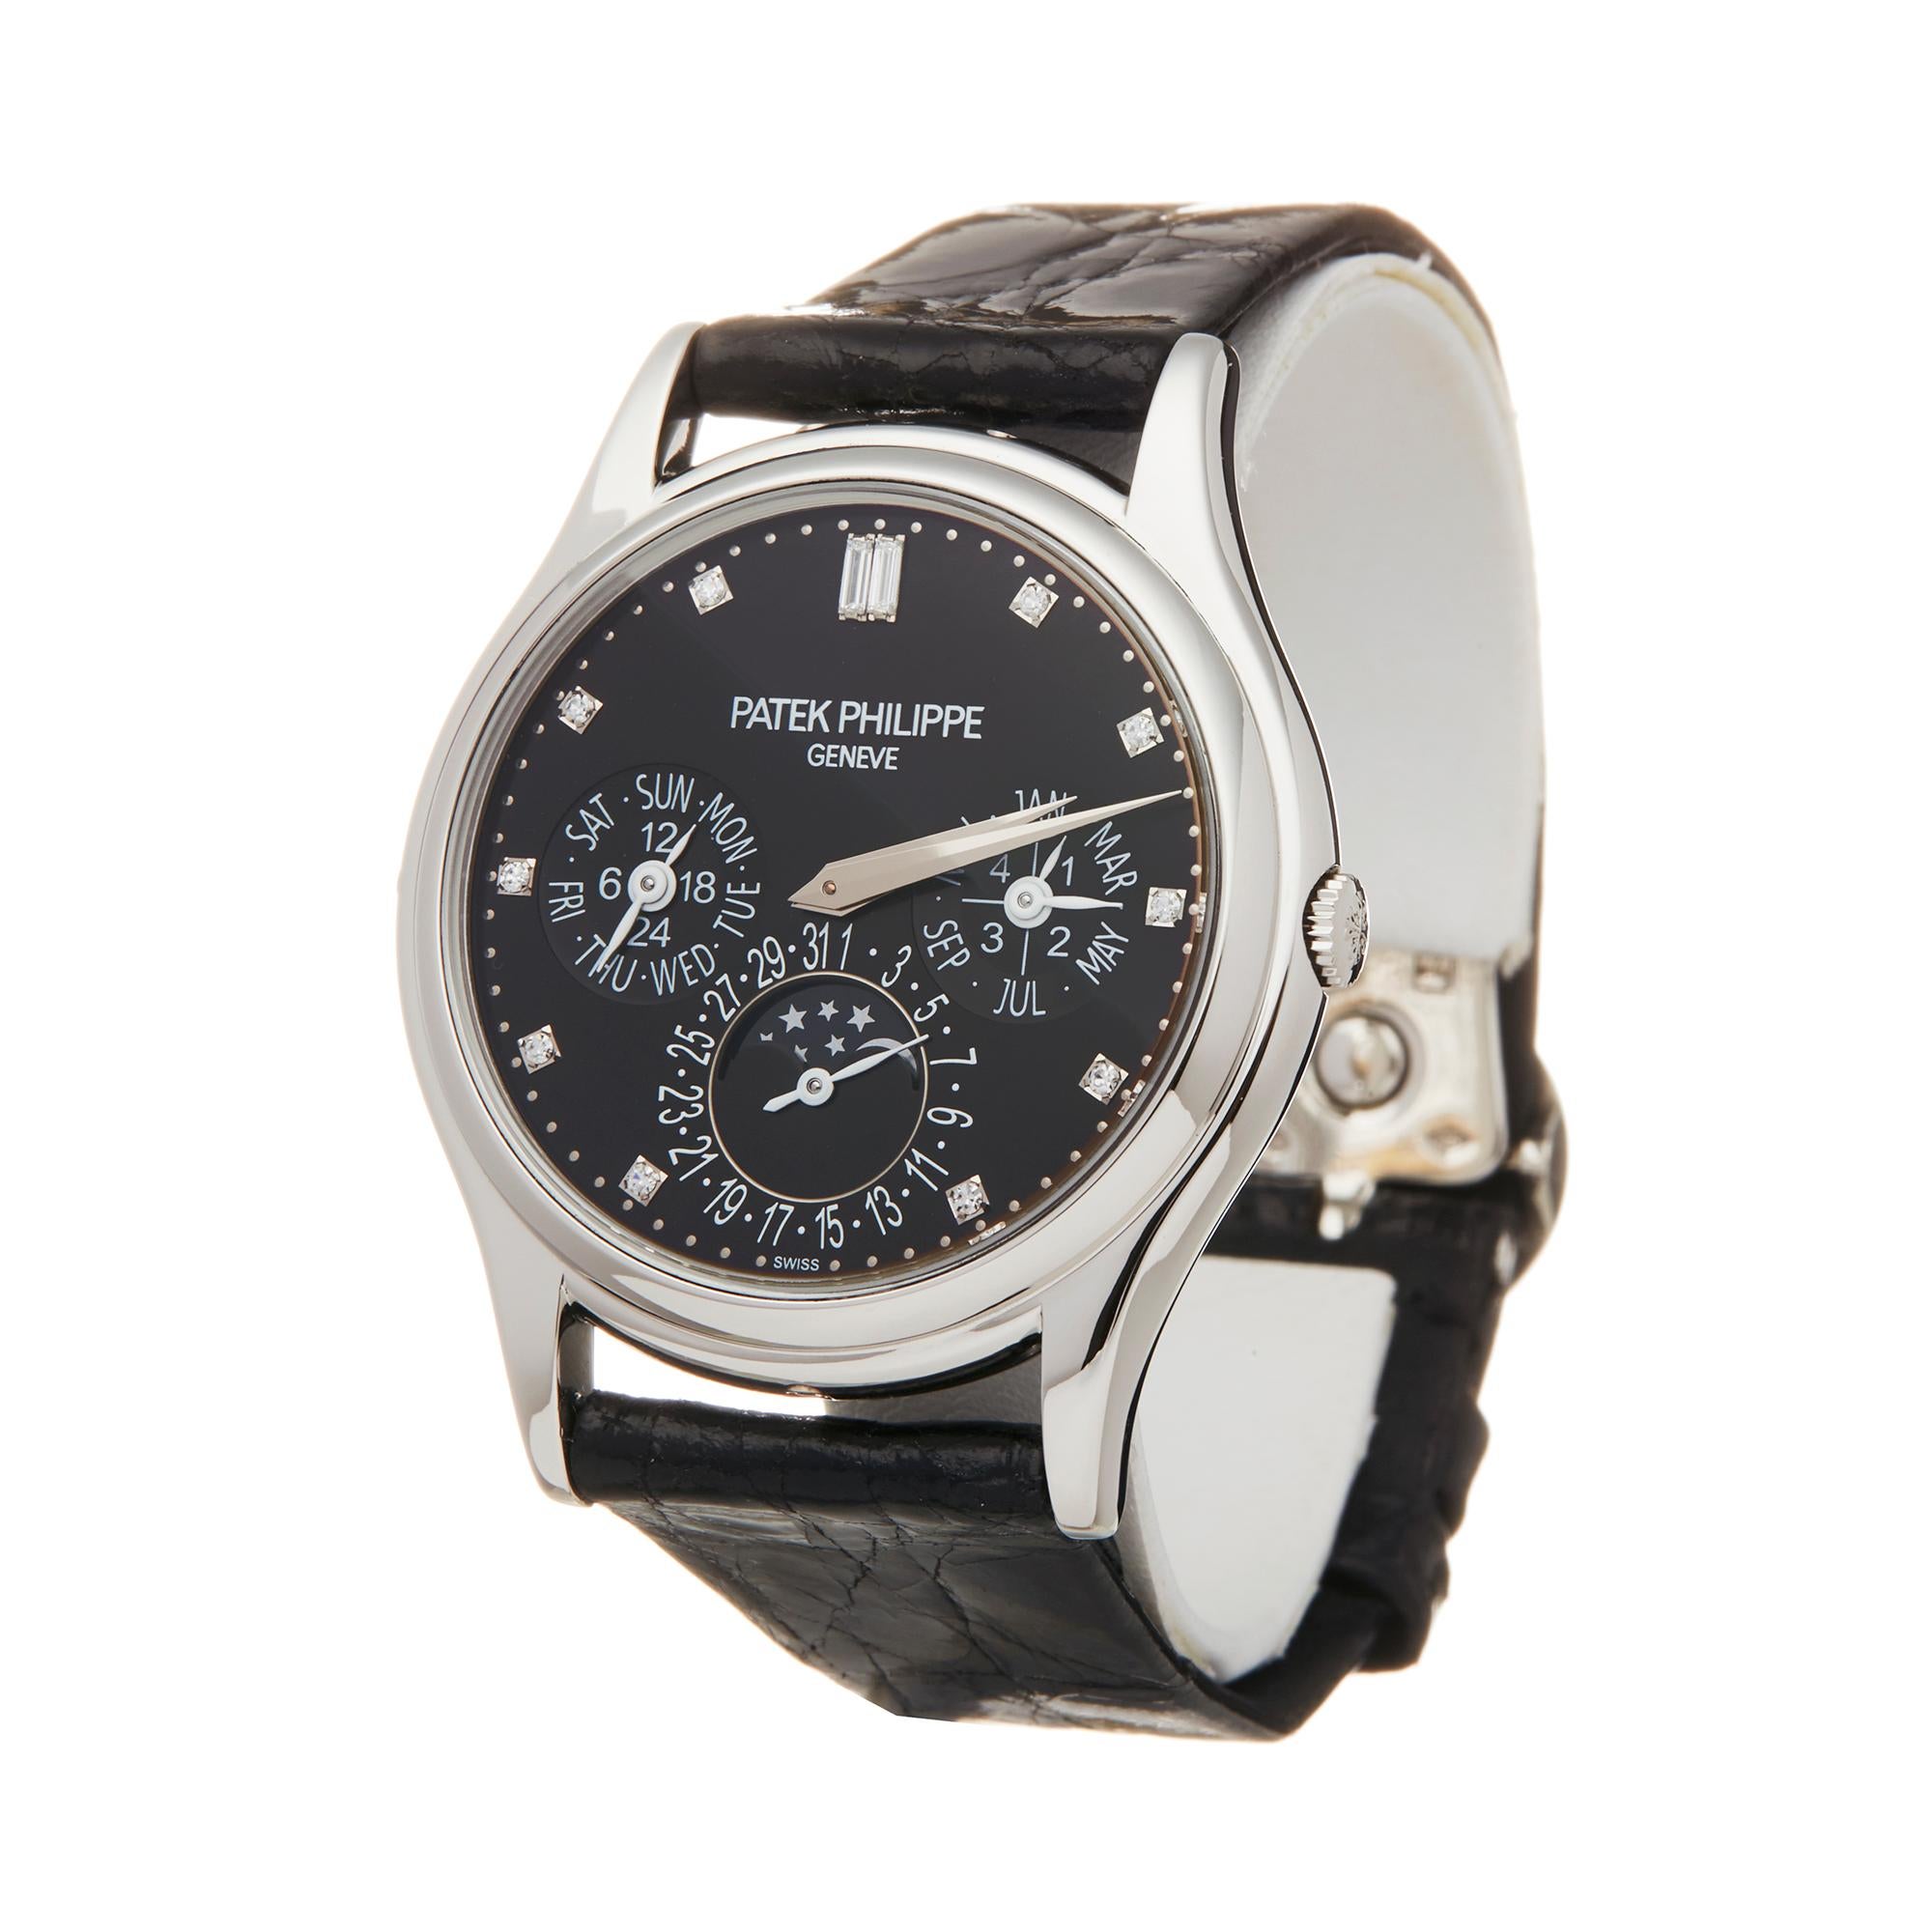 Ref: W5758
Manufacturer: Patek Philippe
Model: Perpetual Calendar
Model Ref: 5140P
Age: Circa 2000's
Gender: Mens
Complete With: Box Only
Dial: Black & Diamond Markers
Glass: Sapphire Crystal
Movement: Automatic
Water Resistance: To Manufacturers